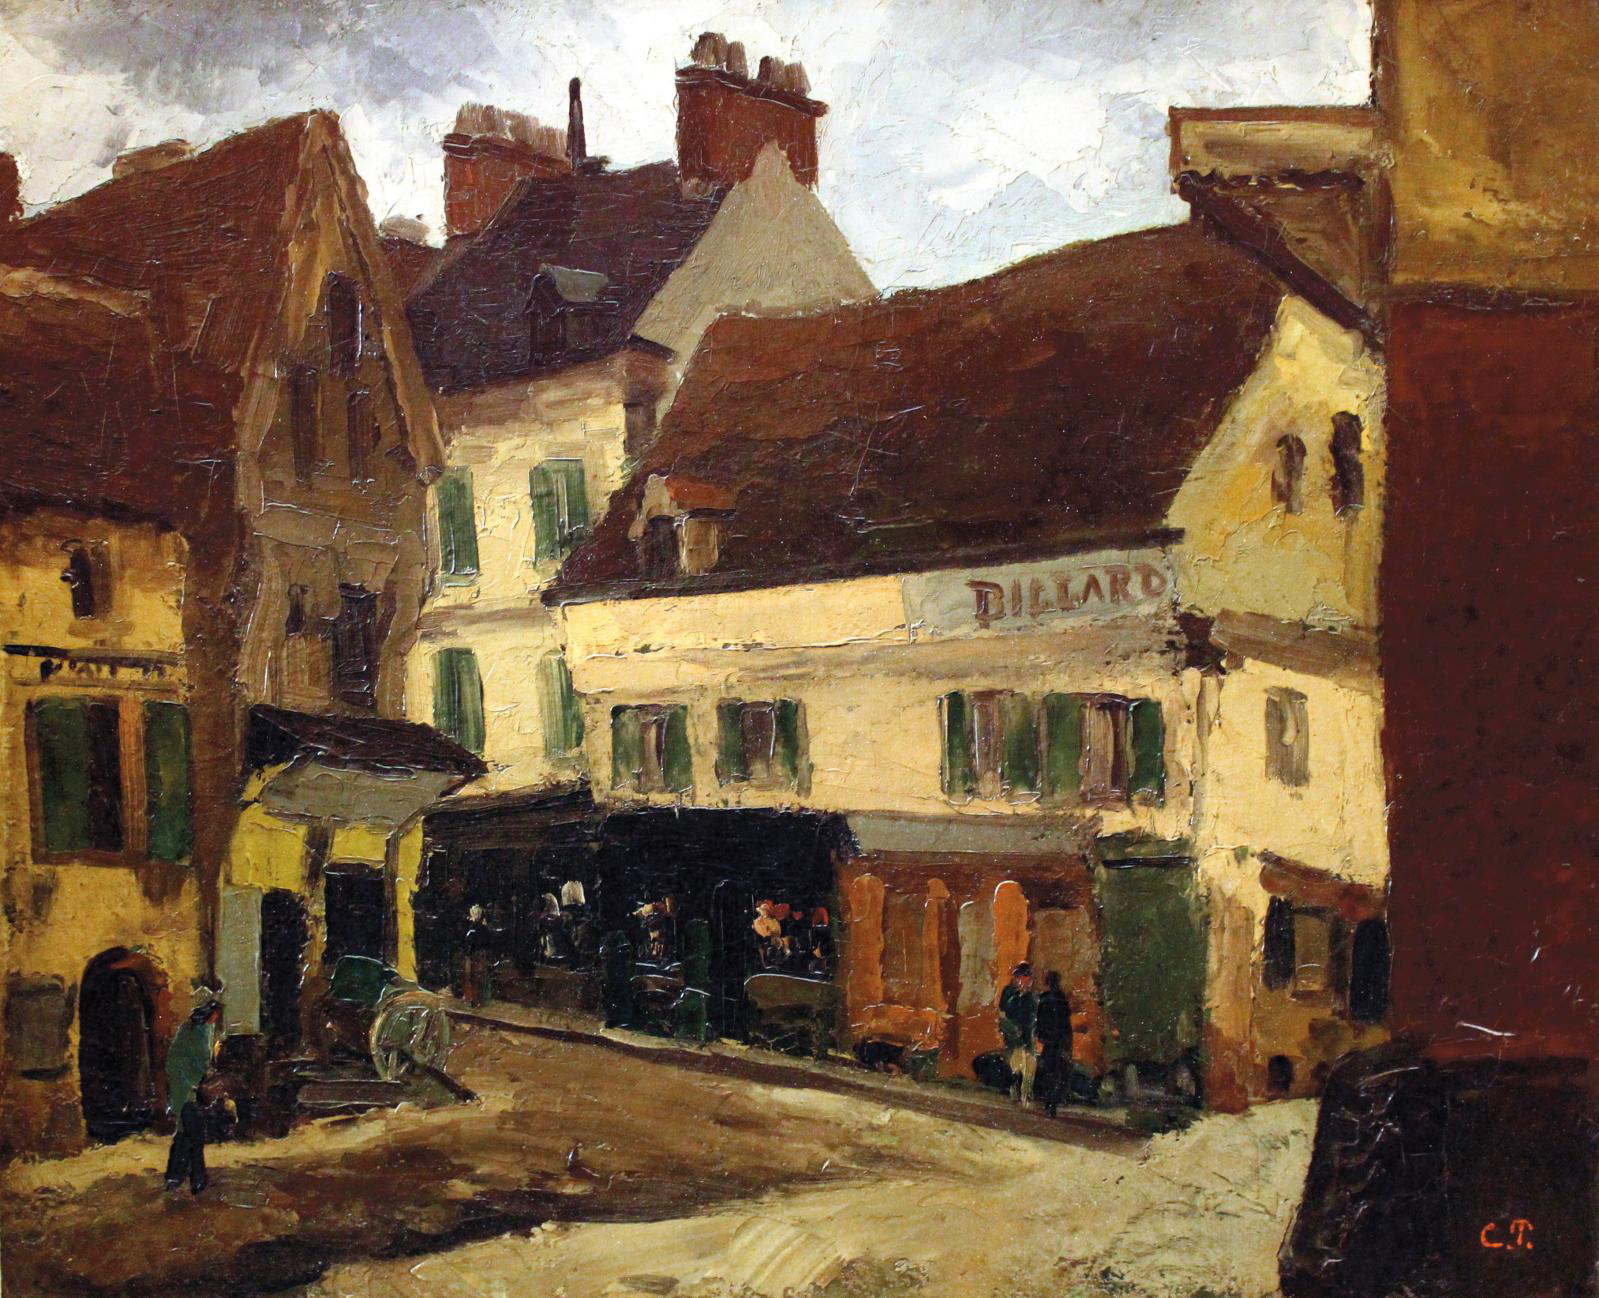 This oil on canvas by Camille Pissarro, Une place à la Roche-Guyon (A Square in La Roche-Guyon), 1867 (50 x 61 cm/19.7 x 24 in) was lot no. 362 of the sale of Armand Dorville's estate in Nice in June 1942. It was purchased by the Nationalgalerie in Berlin in 1961 from the A. Tooth Gallery, London. On April 14, the president of the Berlin museums, Hermann Parzinger, accepted the principle of "restitution", while suggesting an arrangement with the family whereby the painting could remain in the museum.